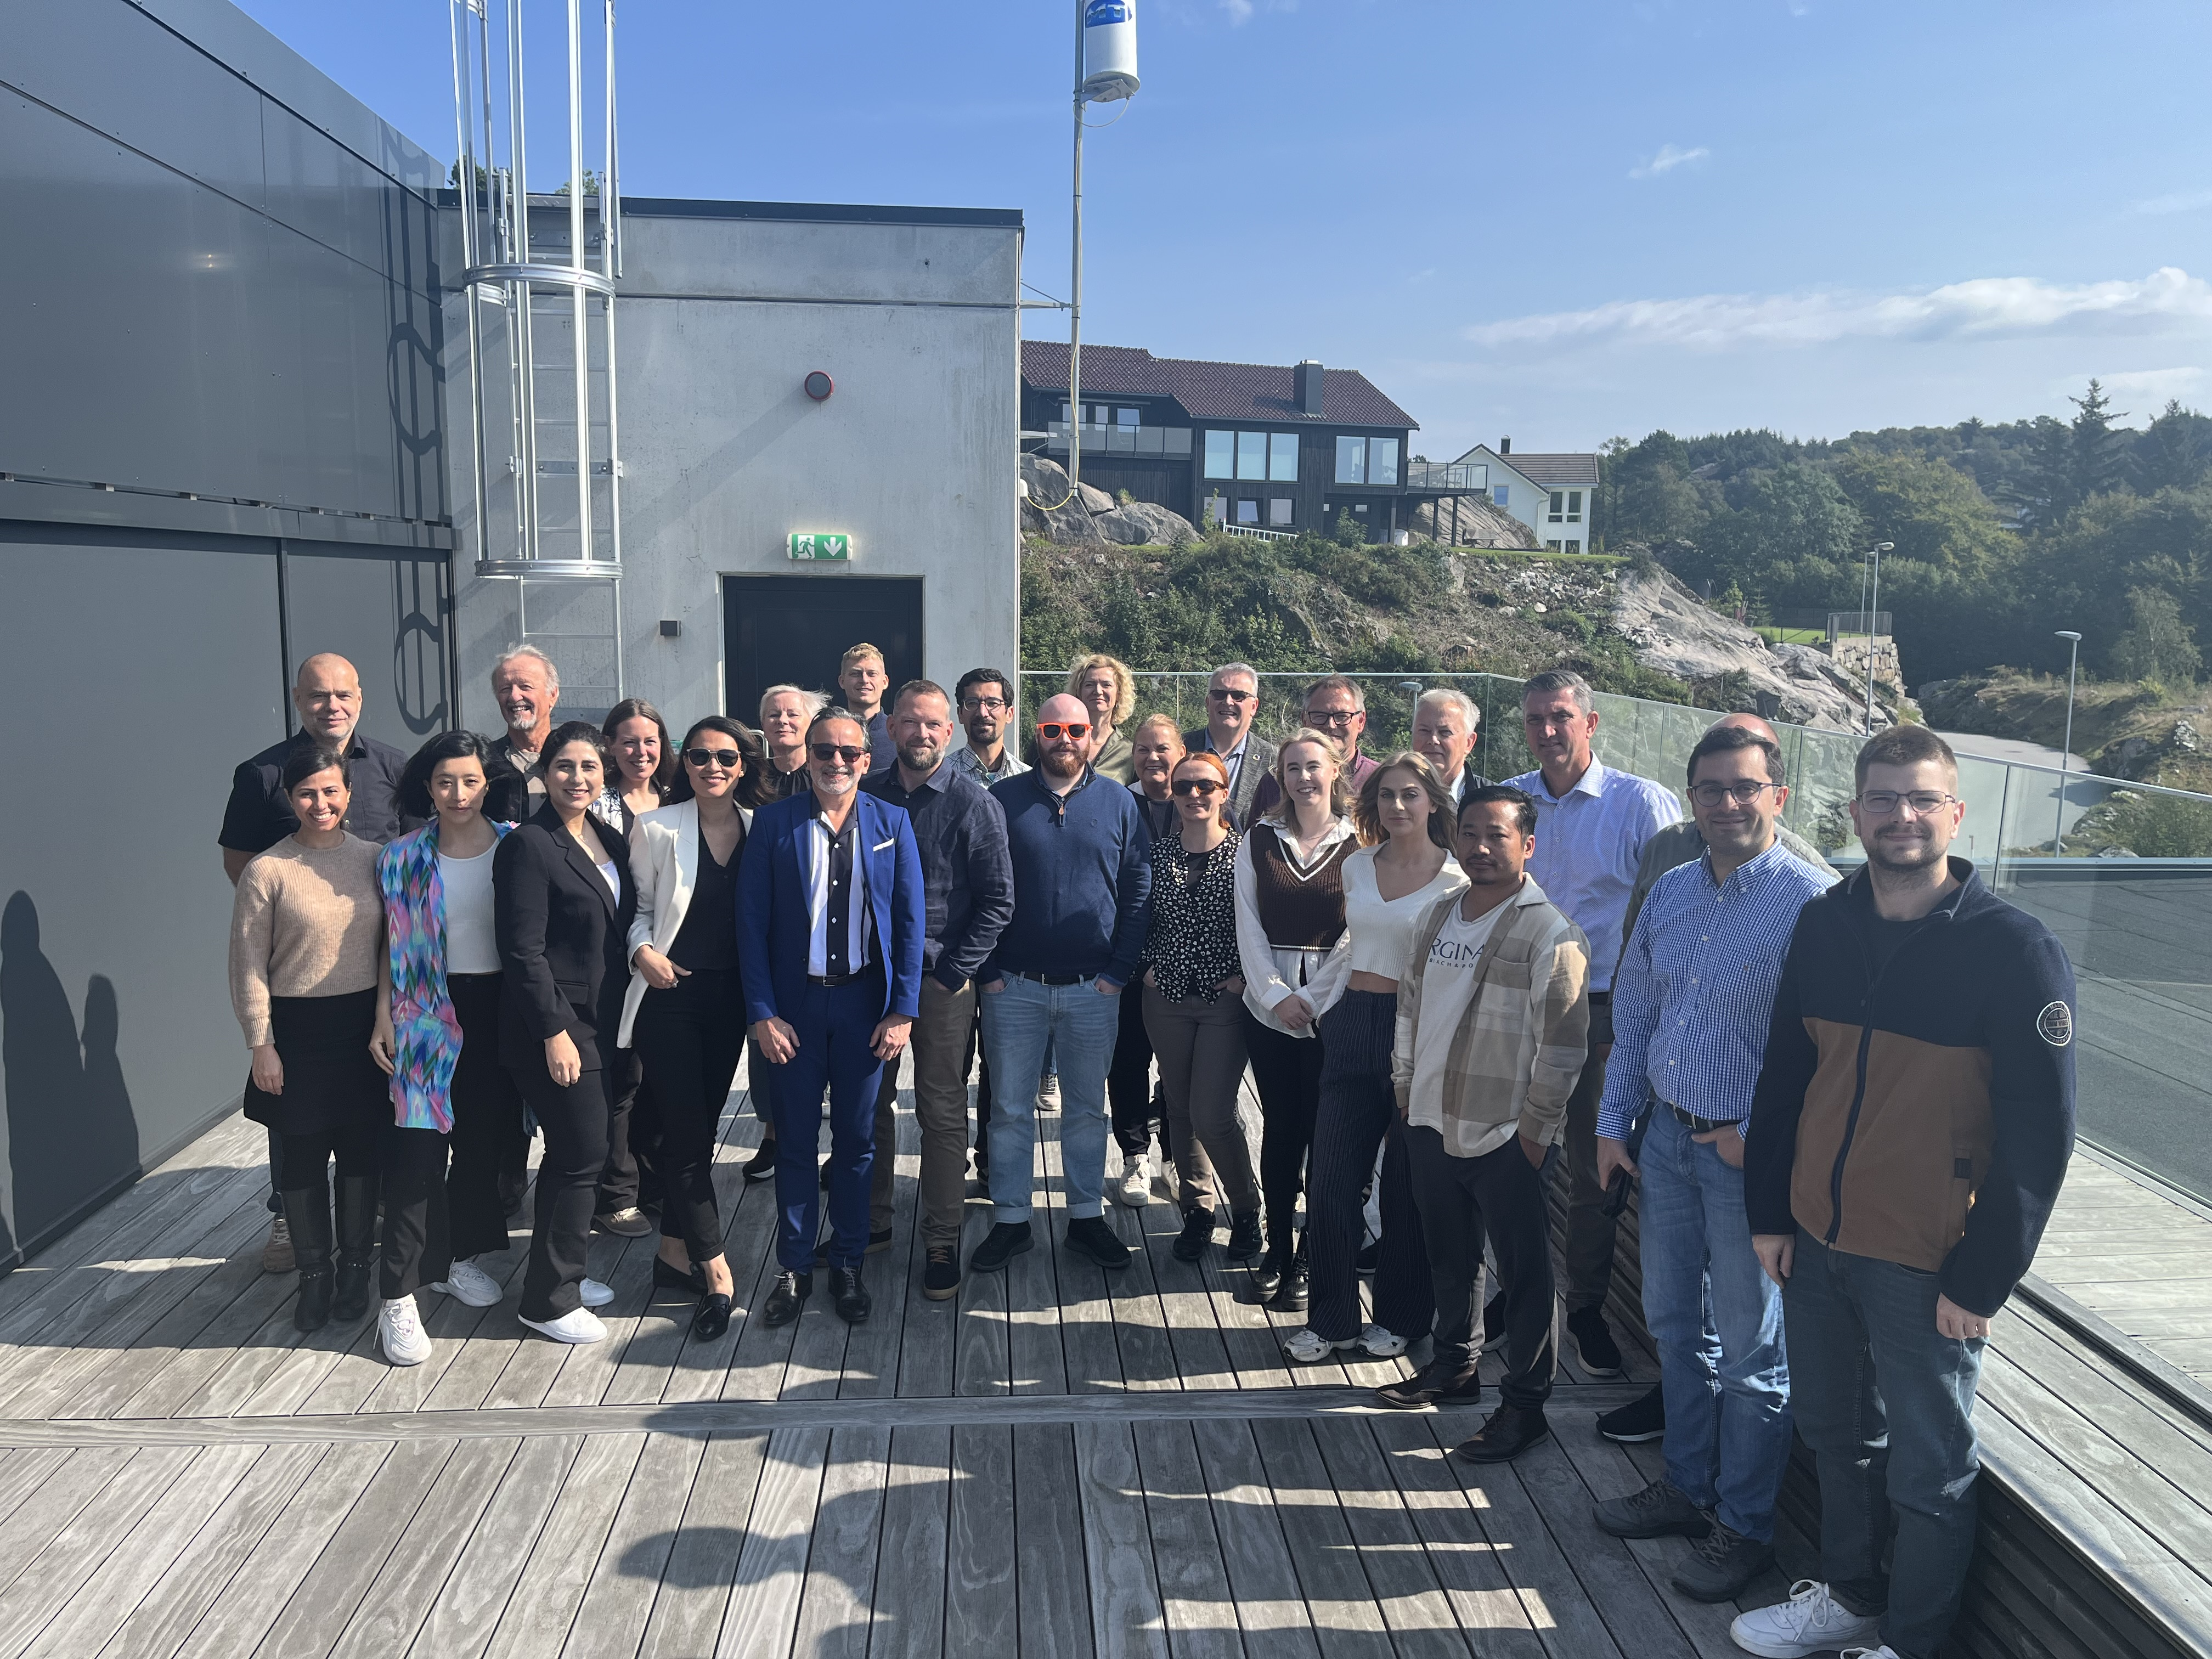 The photo shows a group picture including everyone who participated in the Egersund Reimagined conference